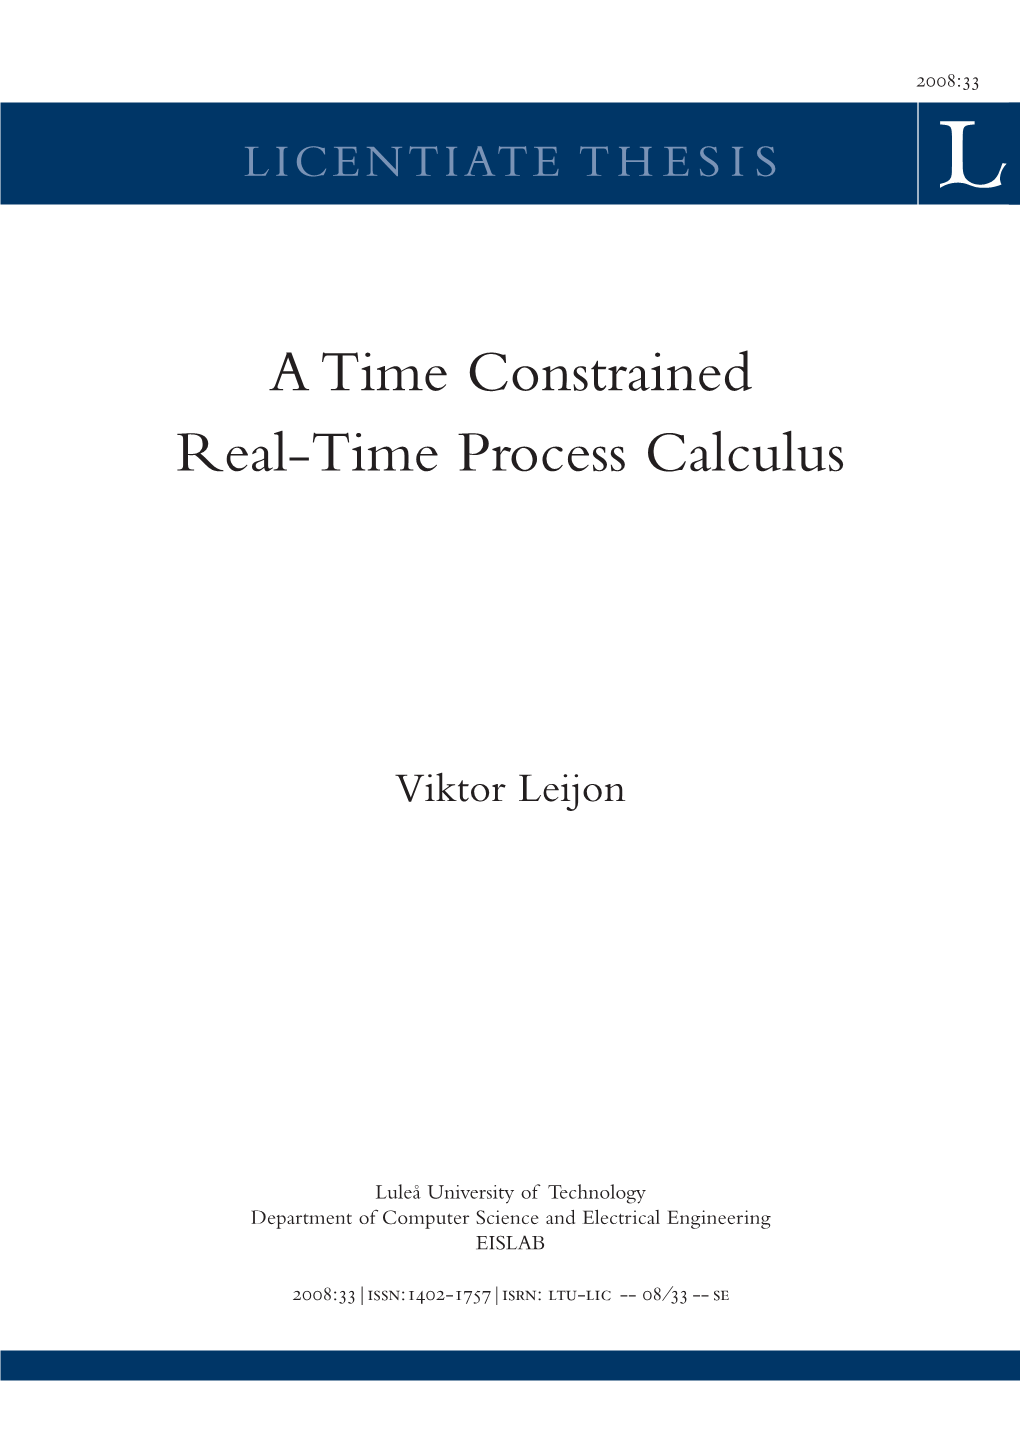 A Time Constrained Real-Time Process Calculus